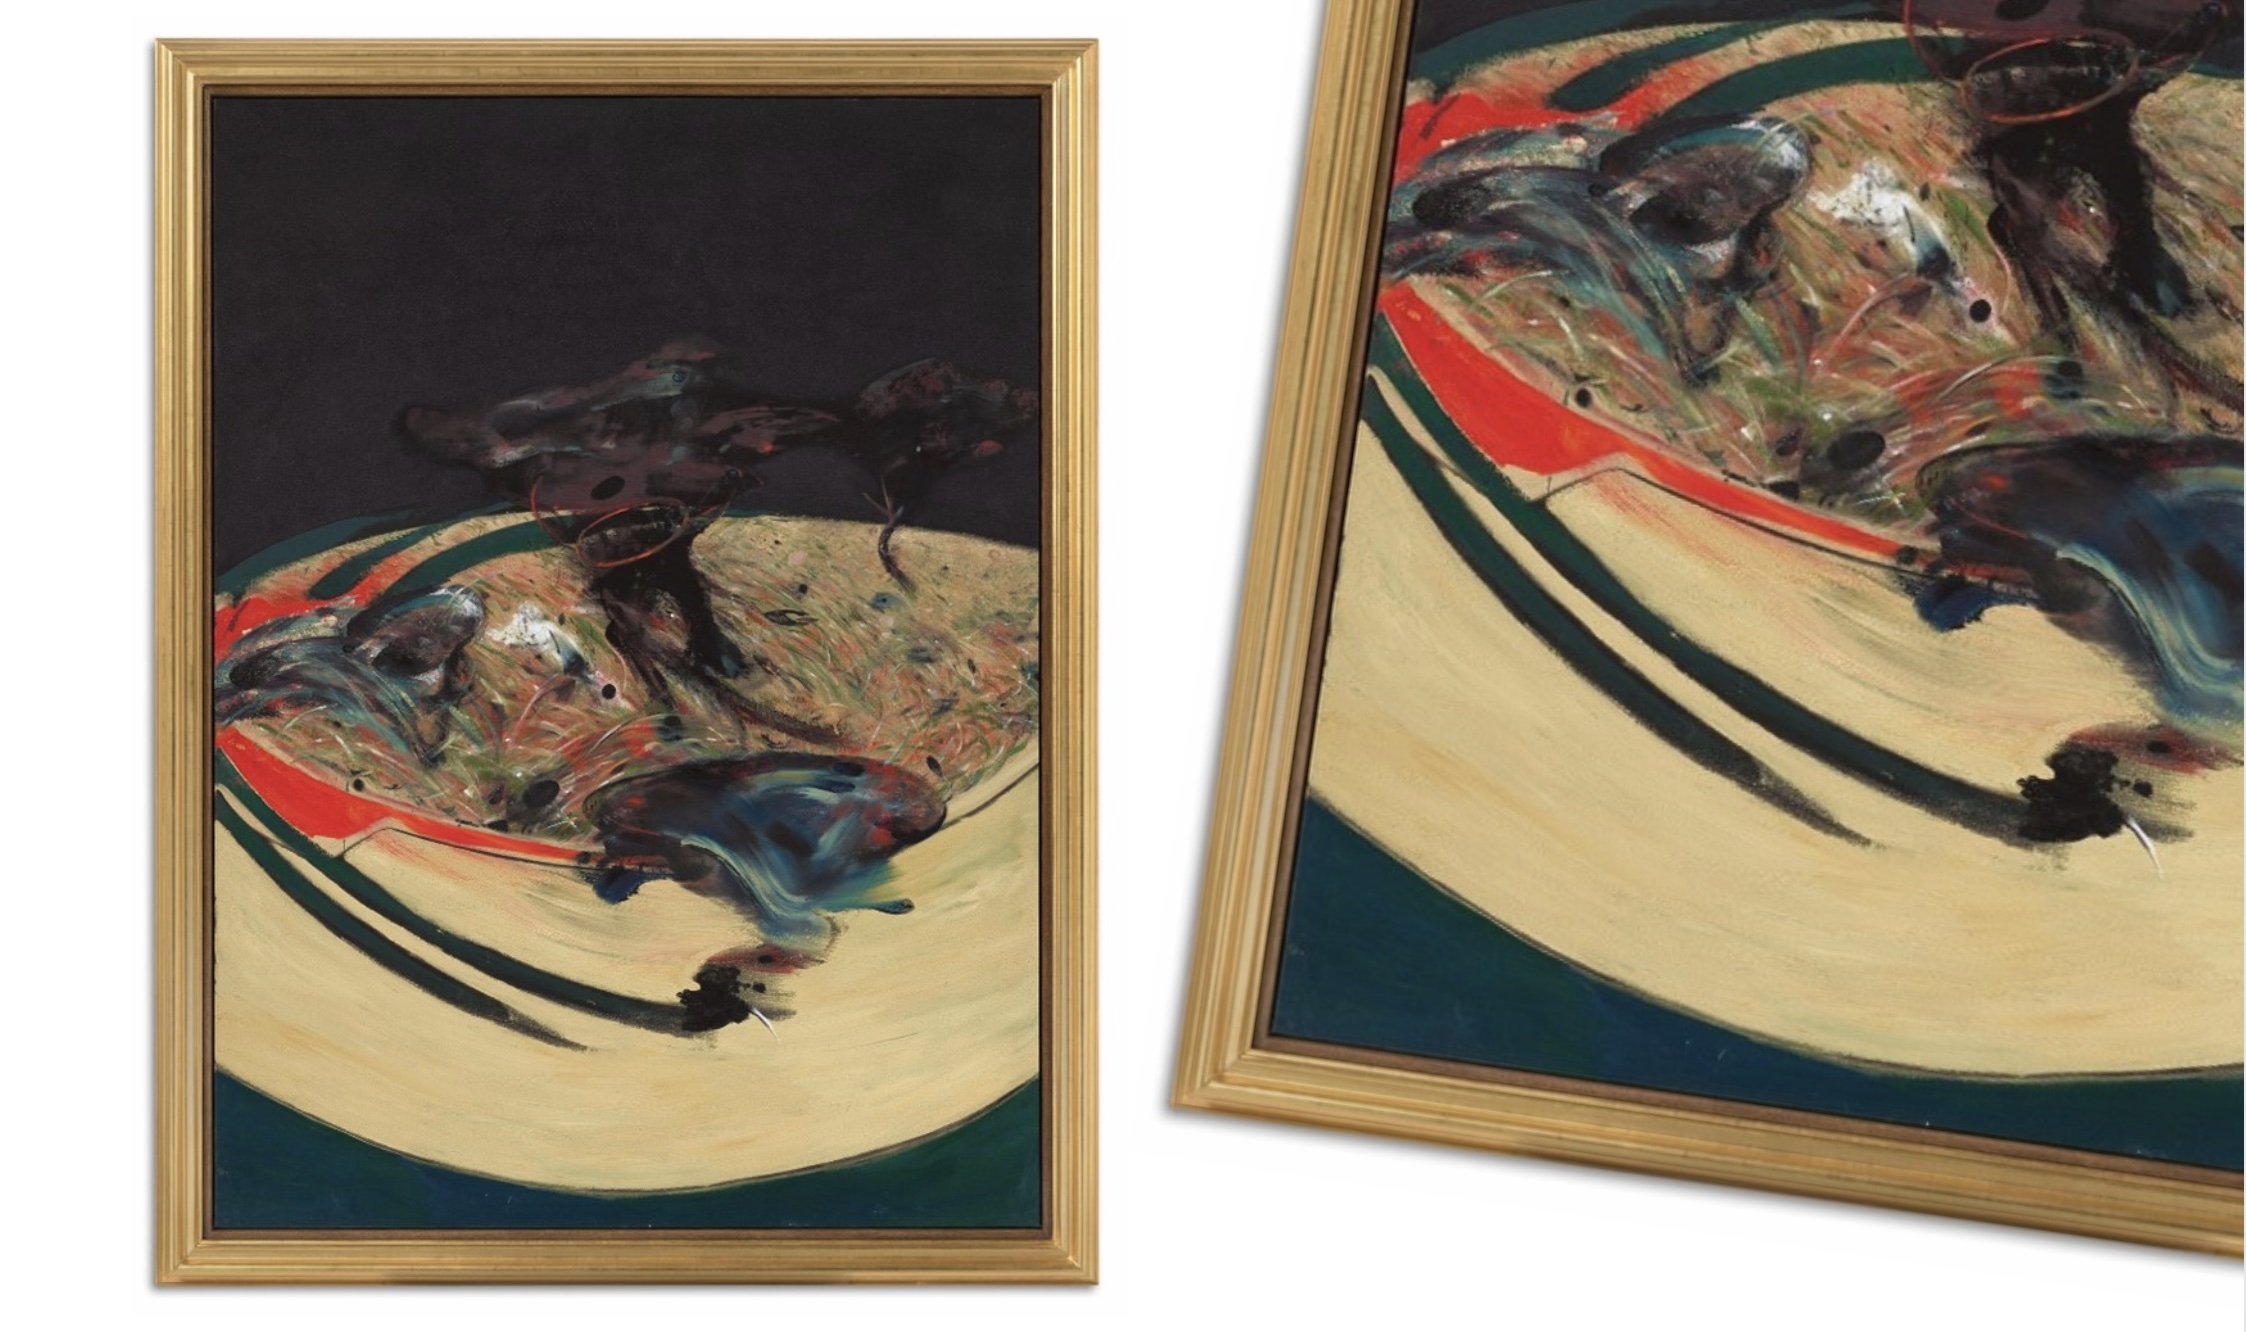 Francis Bacon’s Landscape near Malabata, Tangier at Christie’s – Antique Collecting